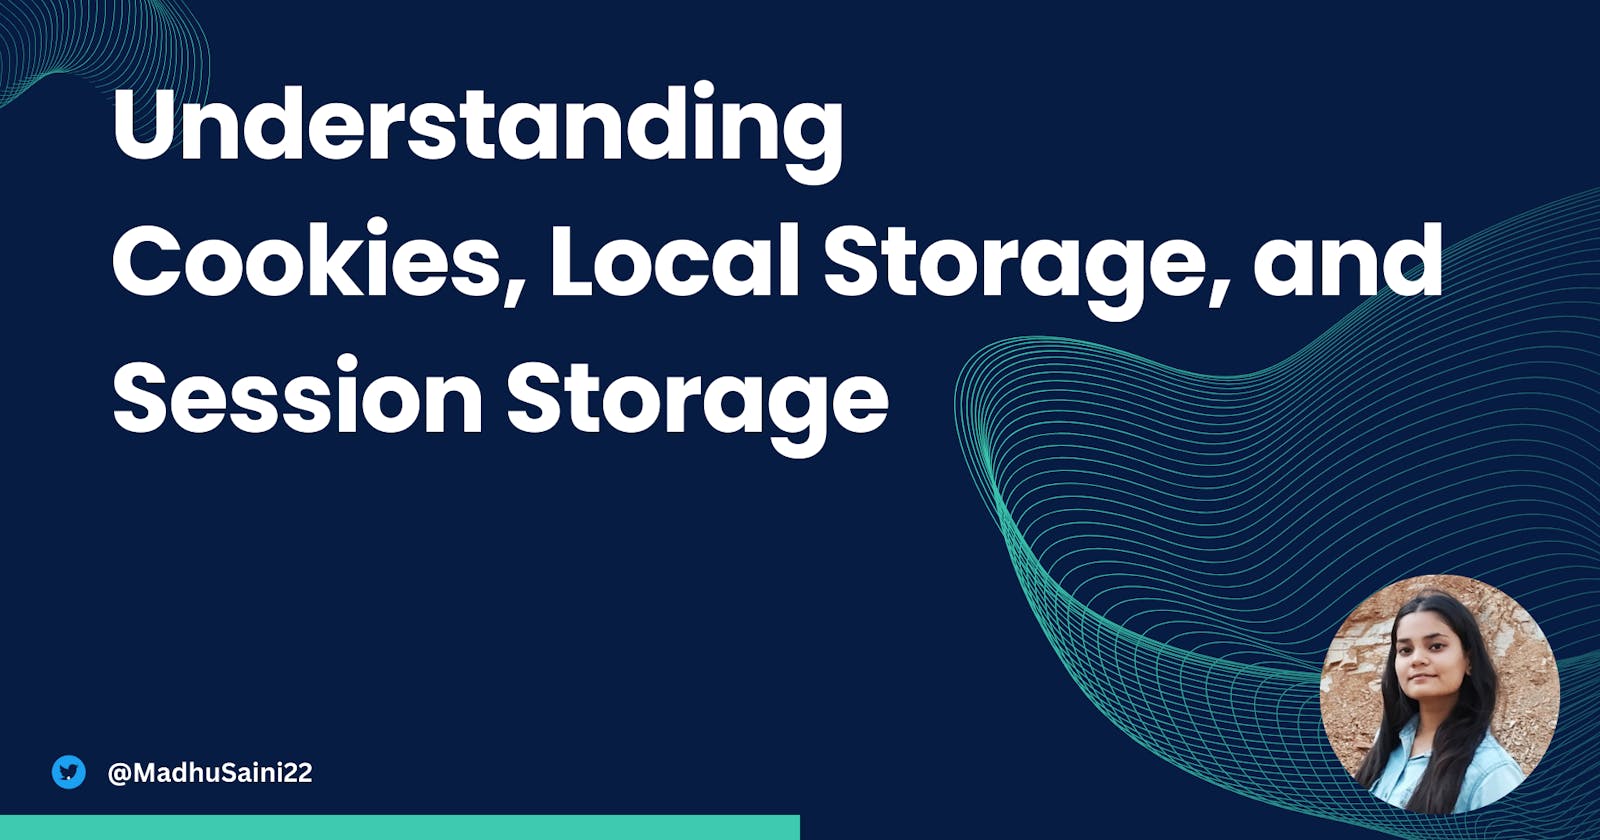 Understanding Cookies, Local Storage, and Session Storage: A Beginner's Guide